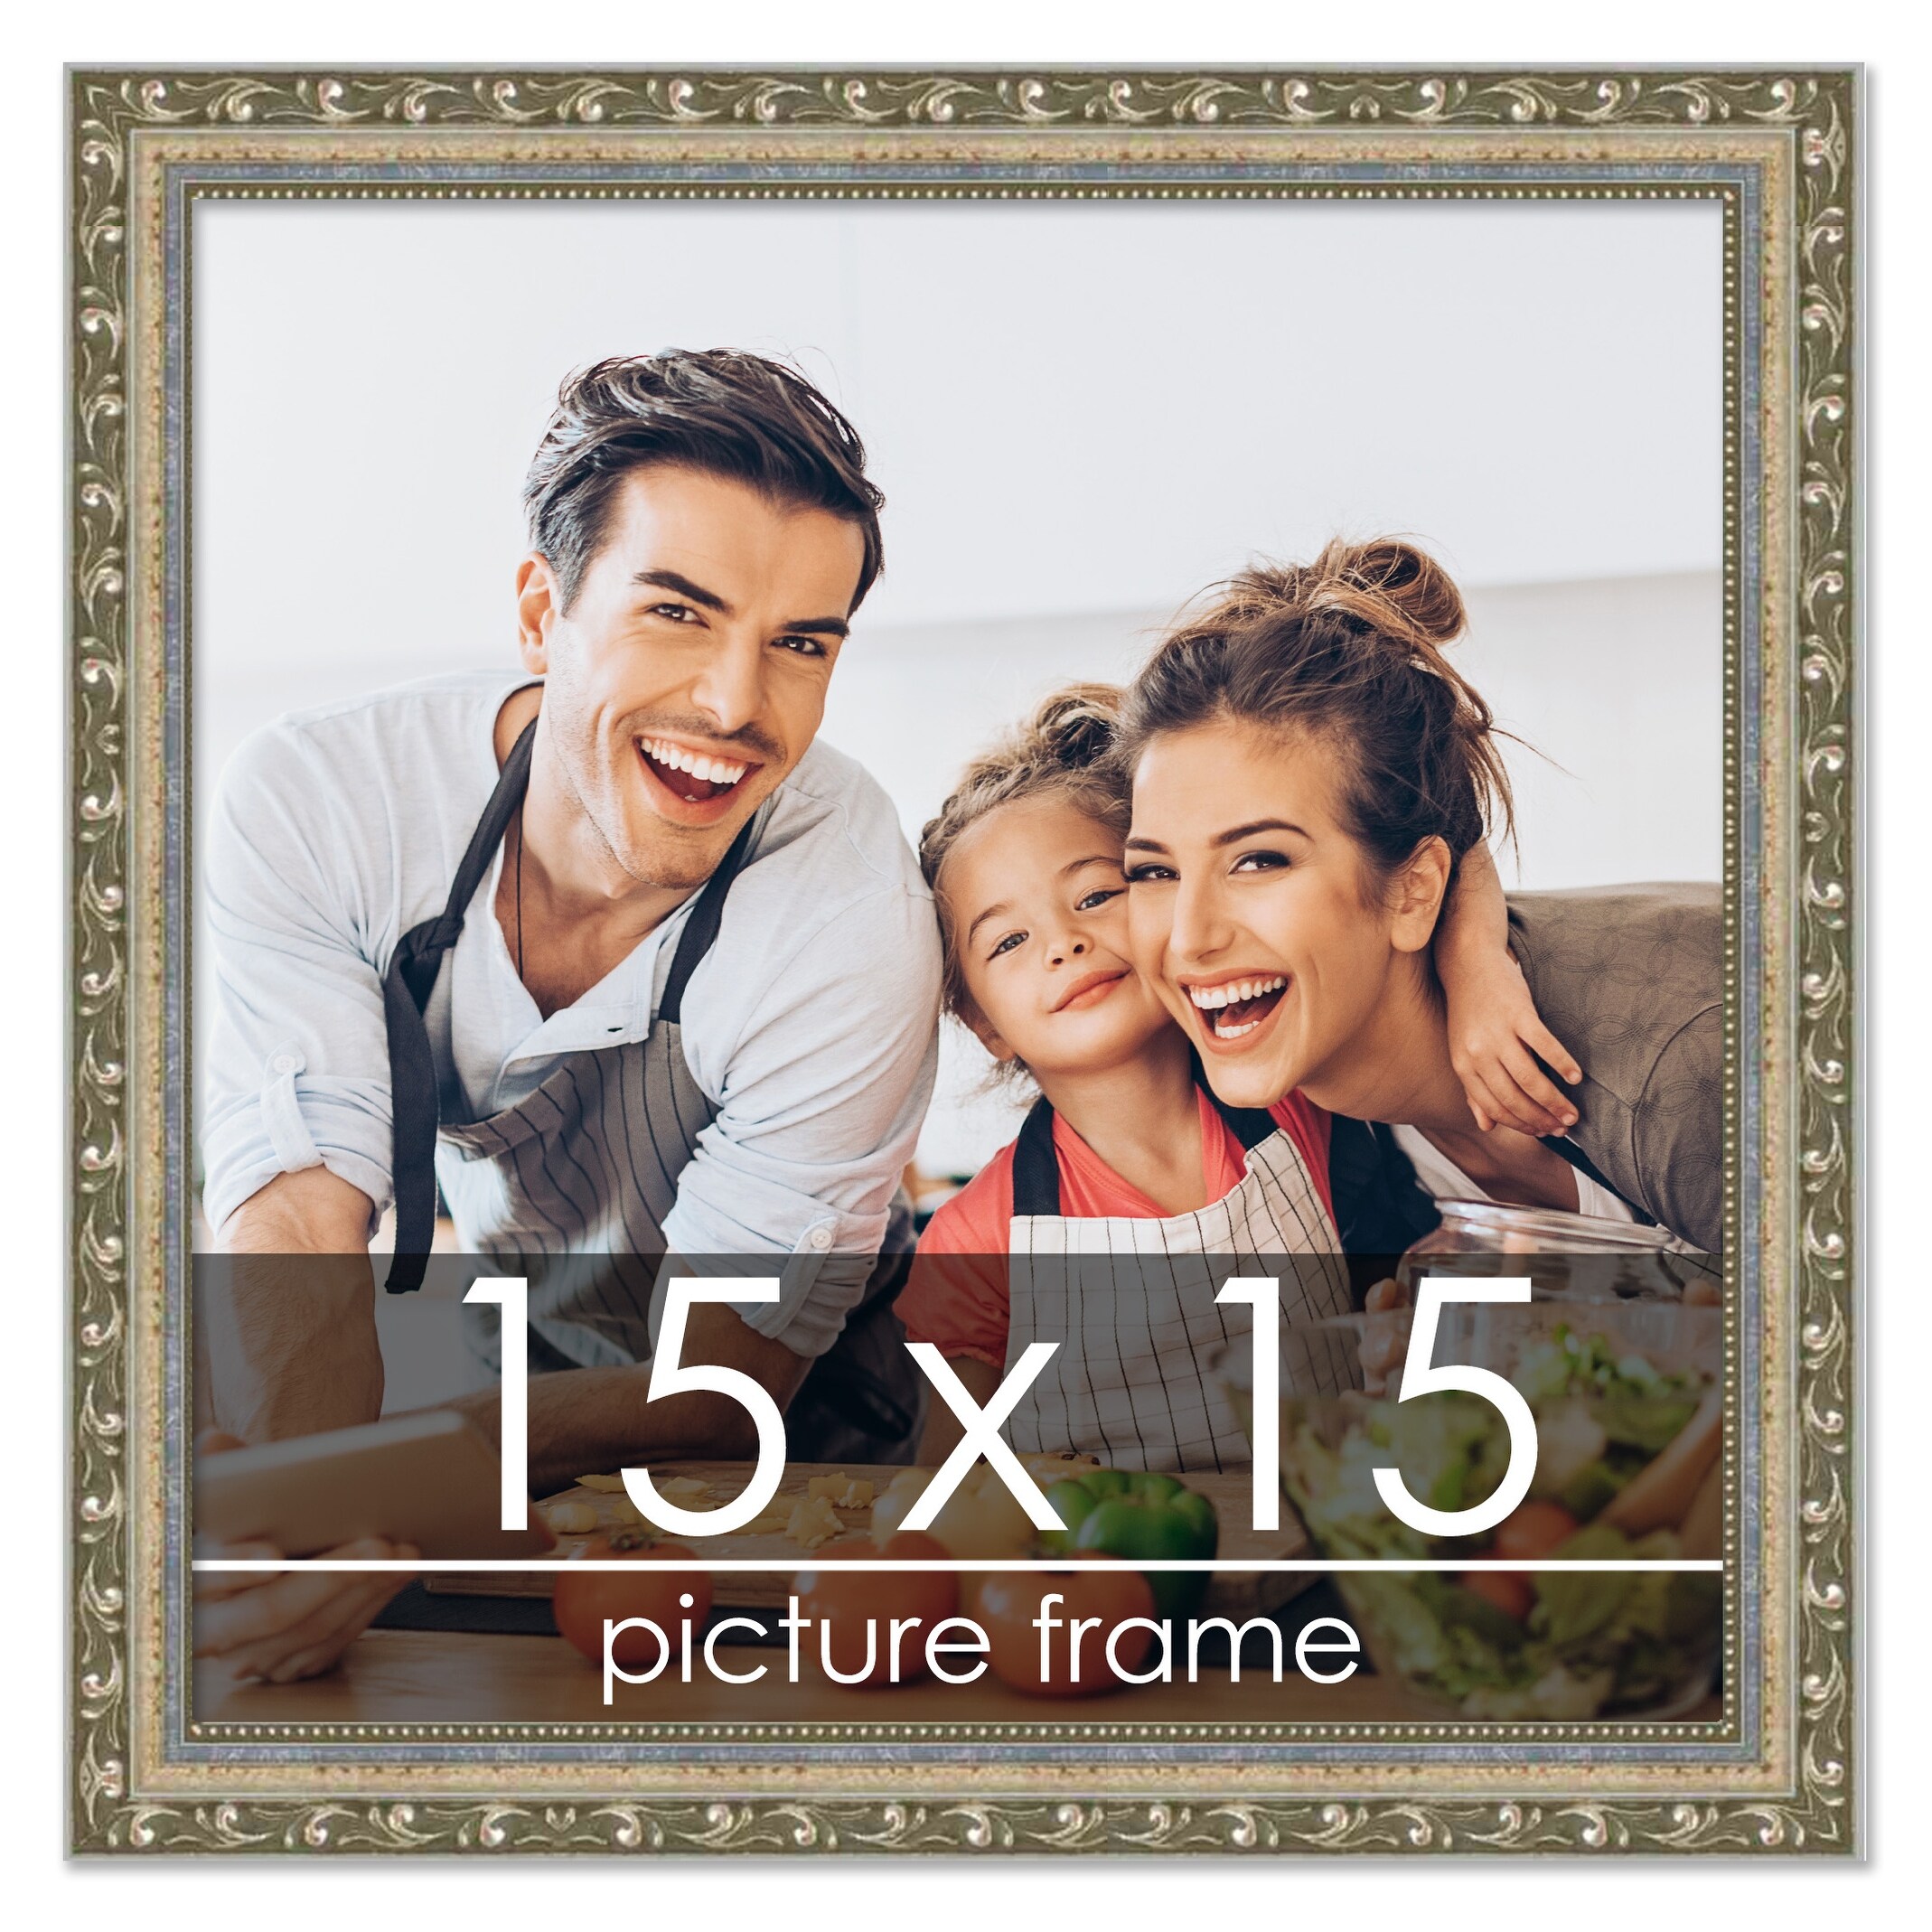 12x12 Frame with Mat - Black 15x15 Frame Wood Made to Display Print or  Poster Measuring 12 x 12 Inches with White Photo Mat - Bed Bath & Beyond -  38522535